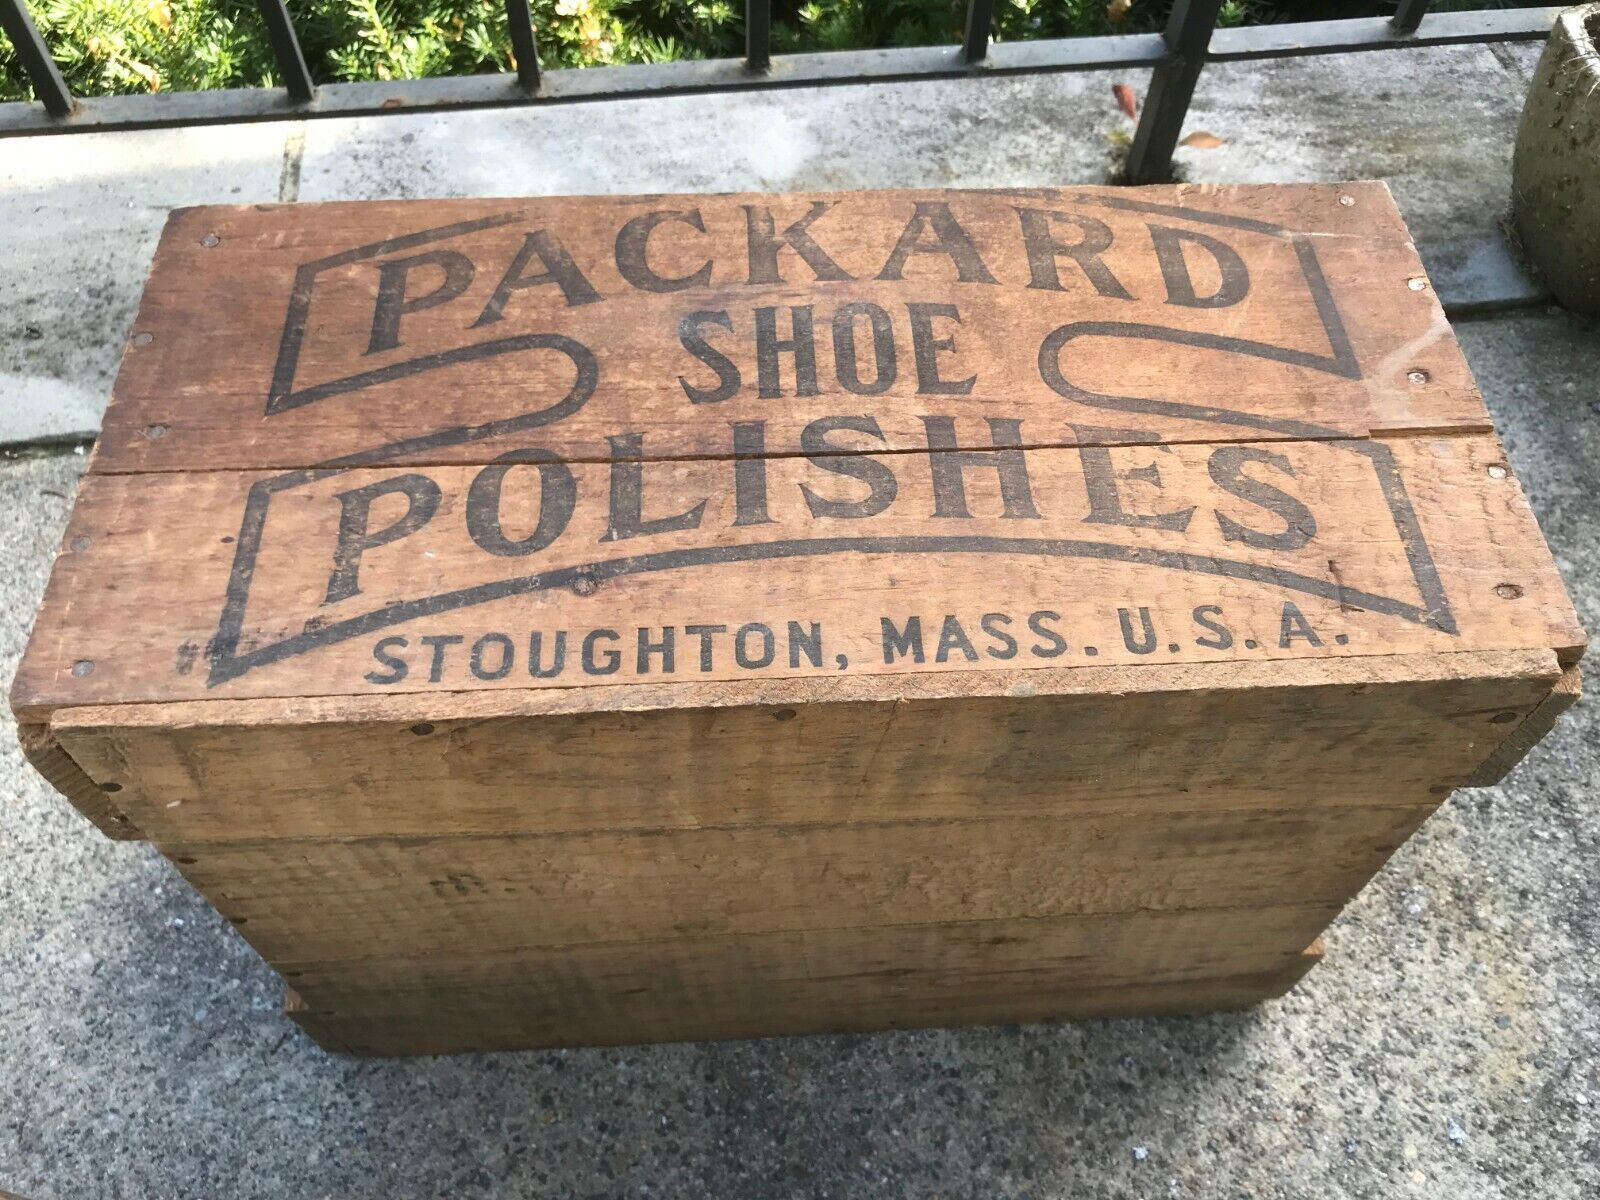 Vtg Antique Packard\'s Shoe Polishes Stoughton, Mass USA Wood Box Crate